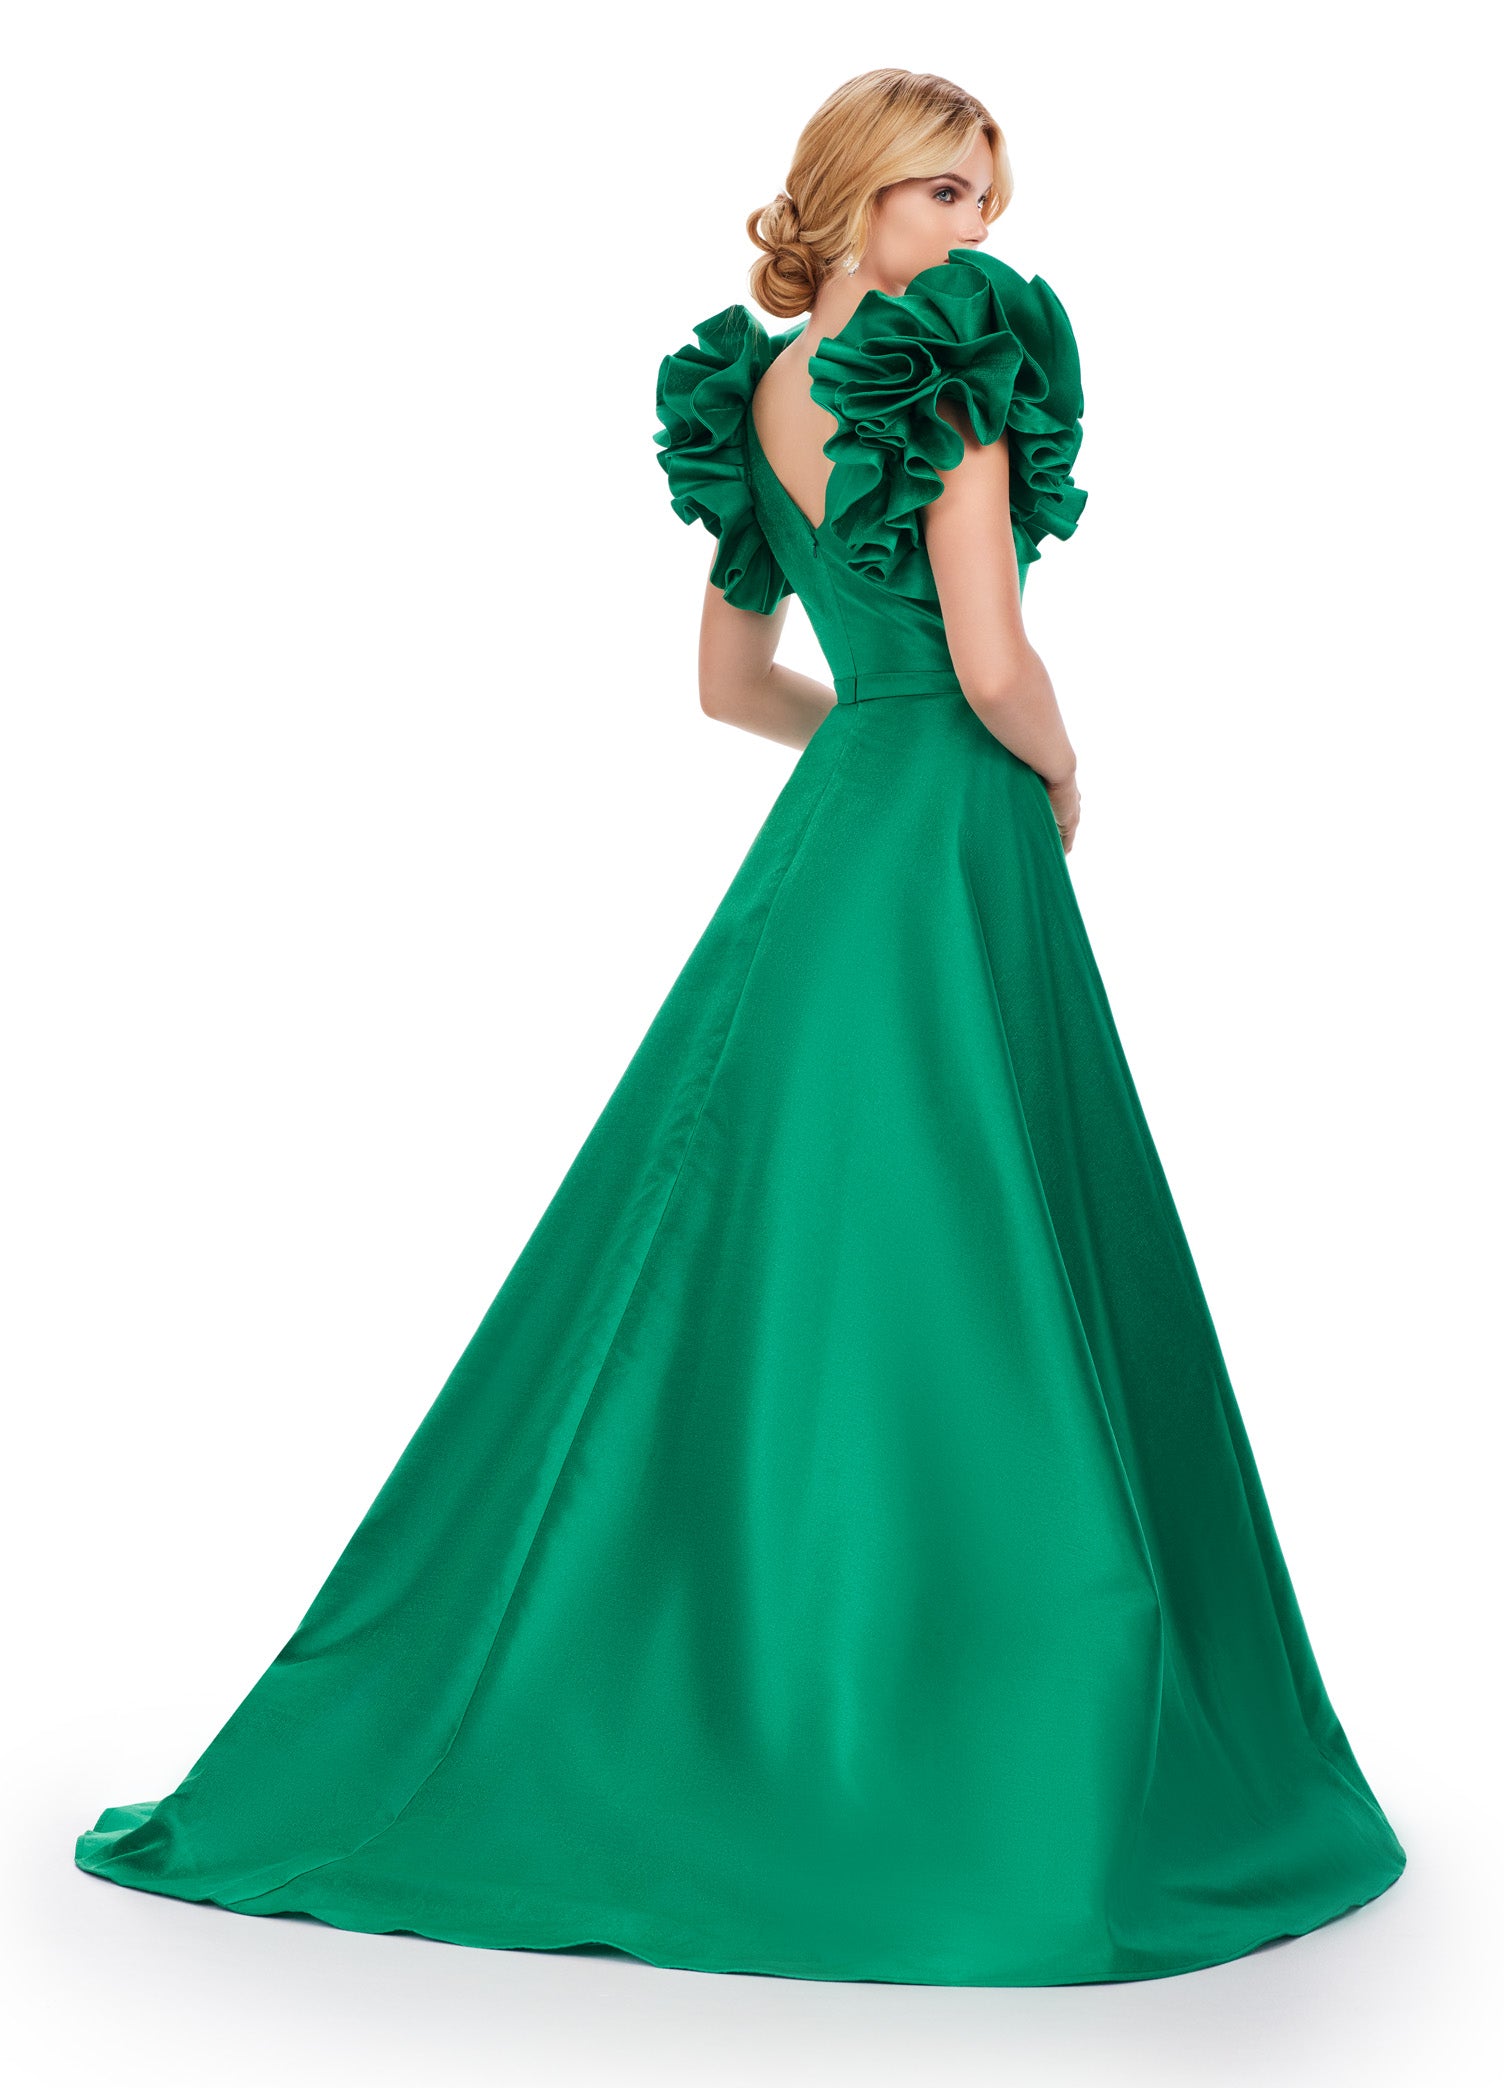 This Ashley Lauren 11610 Long Prom Dress boasts a V-neck and flattering ball gown silhouette in luxurious mikado fabric. The oversized ruffles add a touch of drama to this formal piece, perfect for pageants and other special occasions. Sleek and eye-catching, this dress is sure to make you stand out in any crowd. We're here for the drama! This A-line Mikado gown features a V-neckline and dramatic ruffle sleeves with a slit.